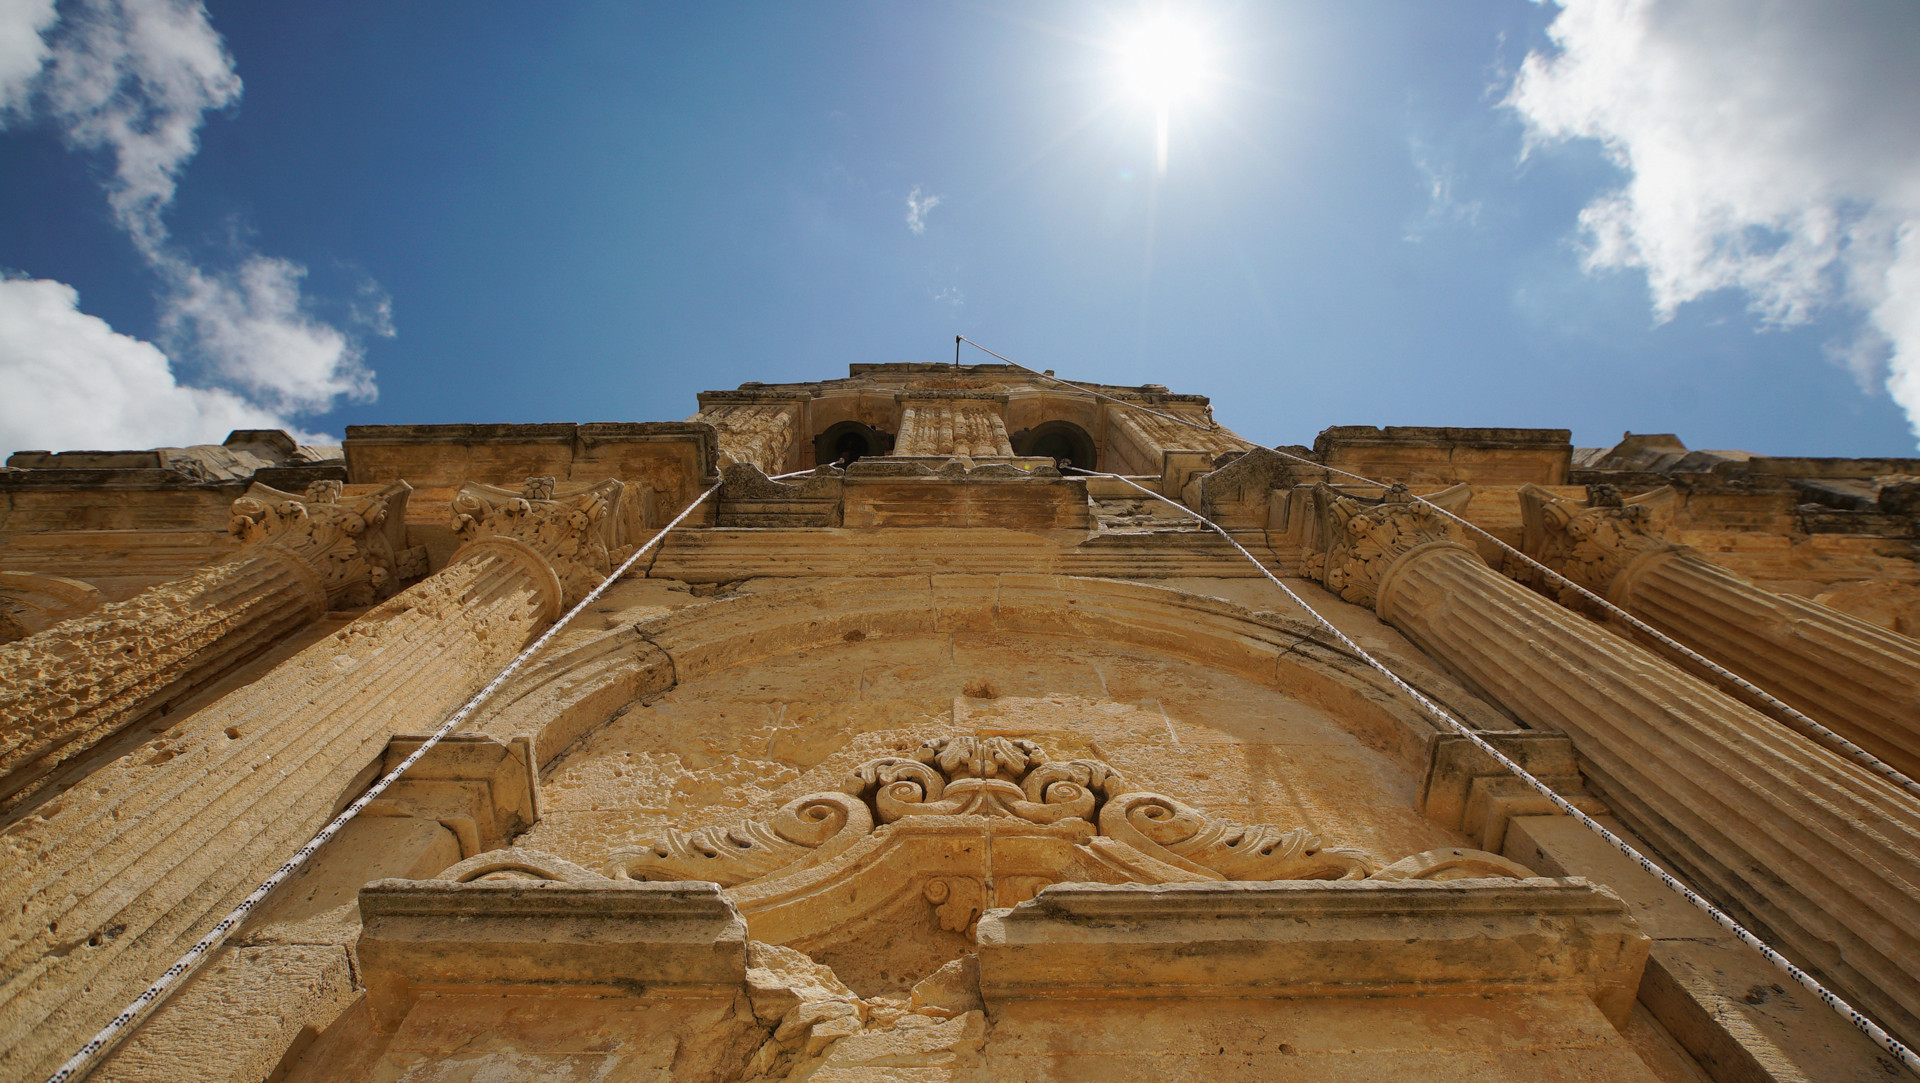 The Arkadi Monastery is an example of Renaissance architecture from Crete’s Venetian rule